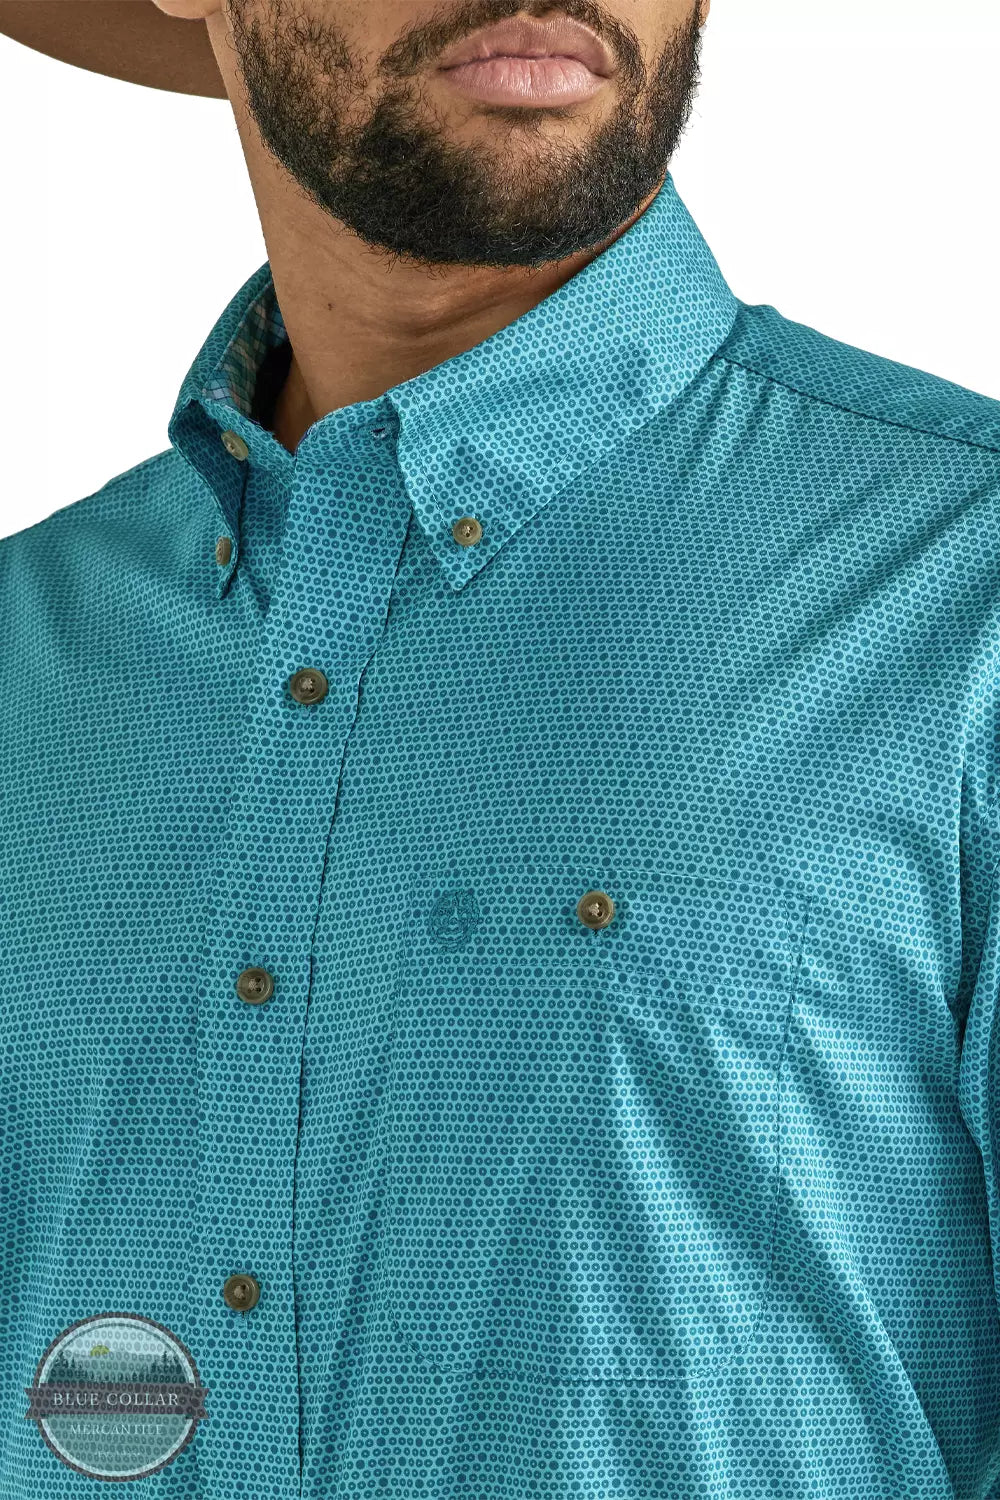 Wrangler 112338088 George Strait Long Sleeve One Pocket Button Down Shirt in Teal Discs Detail View